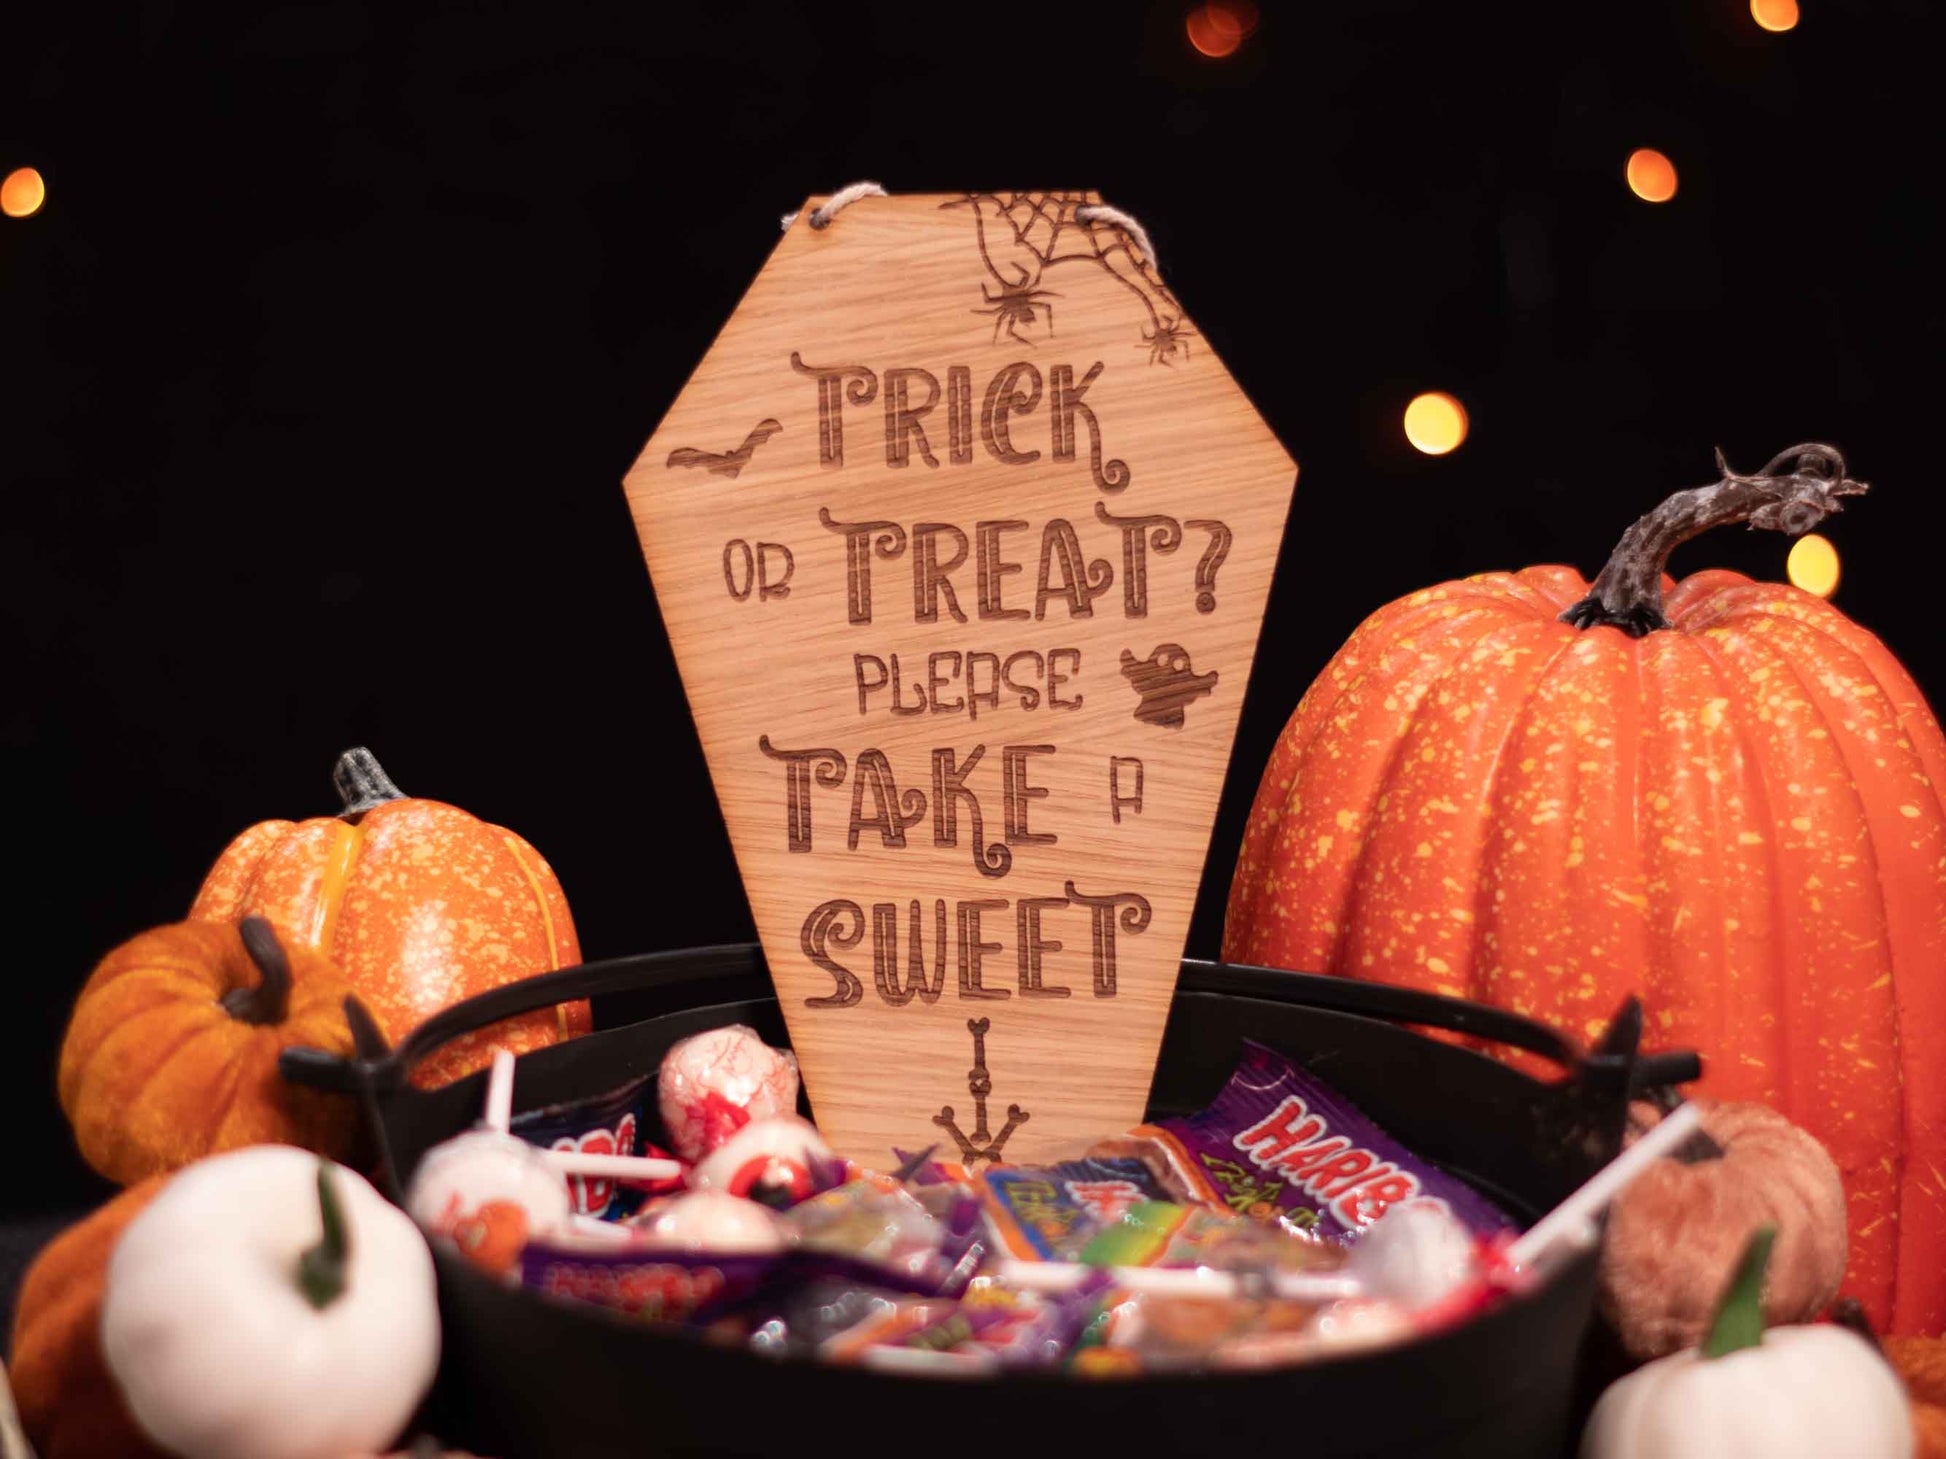 treat or treat, please take a sweet sign